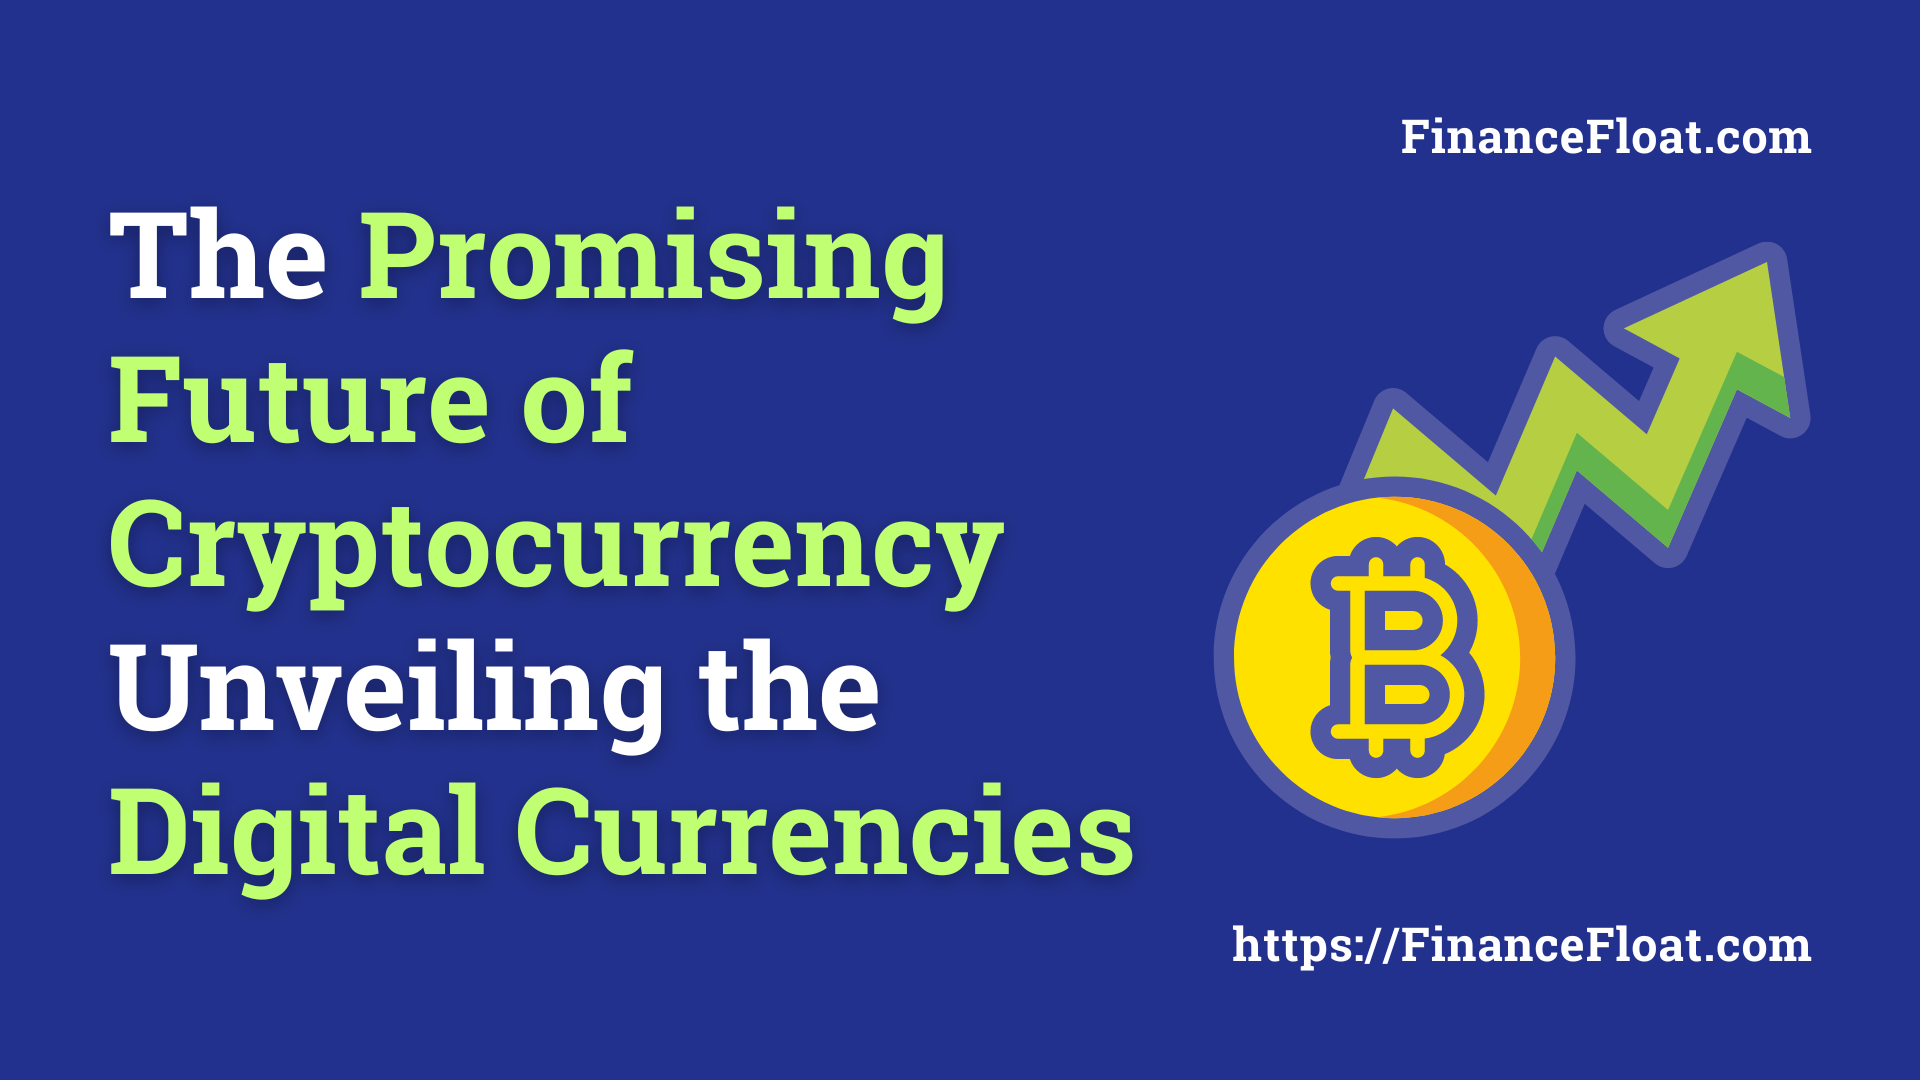 The Promising Future of Cryptocurrency Unveiling the Digital Currencies